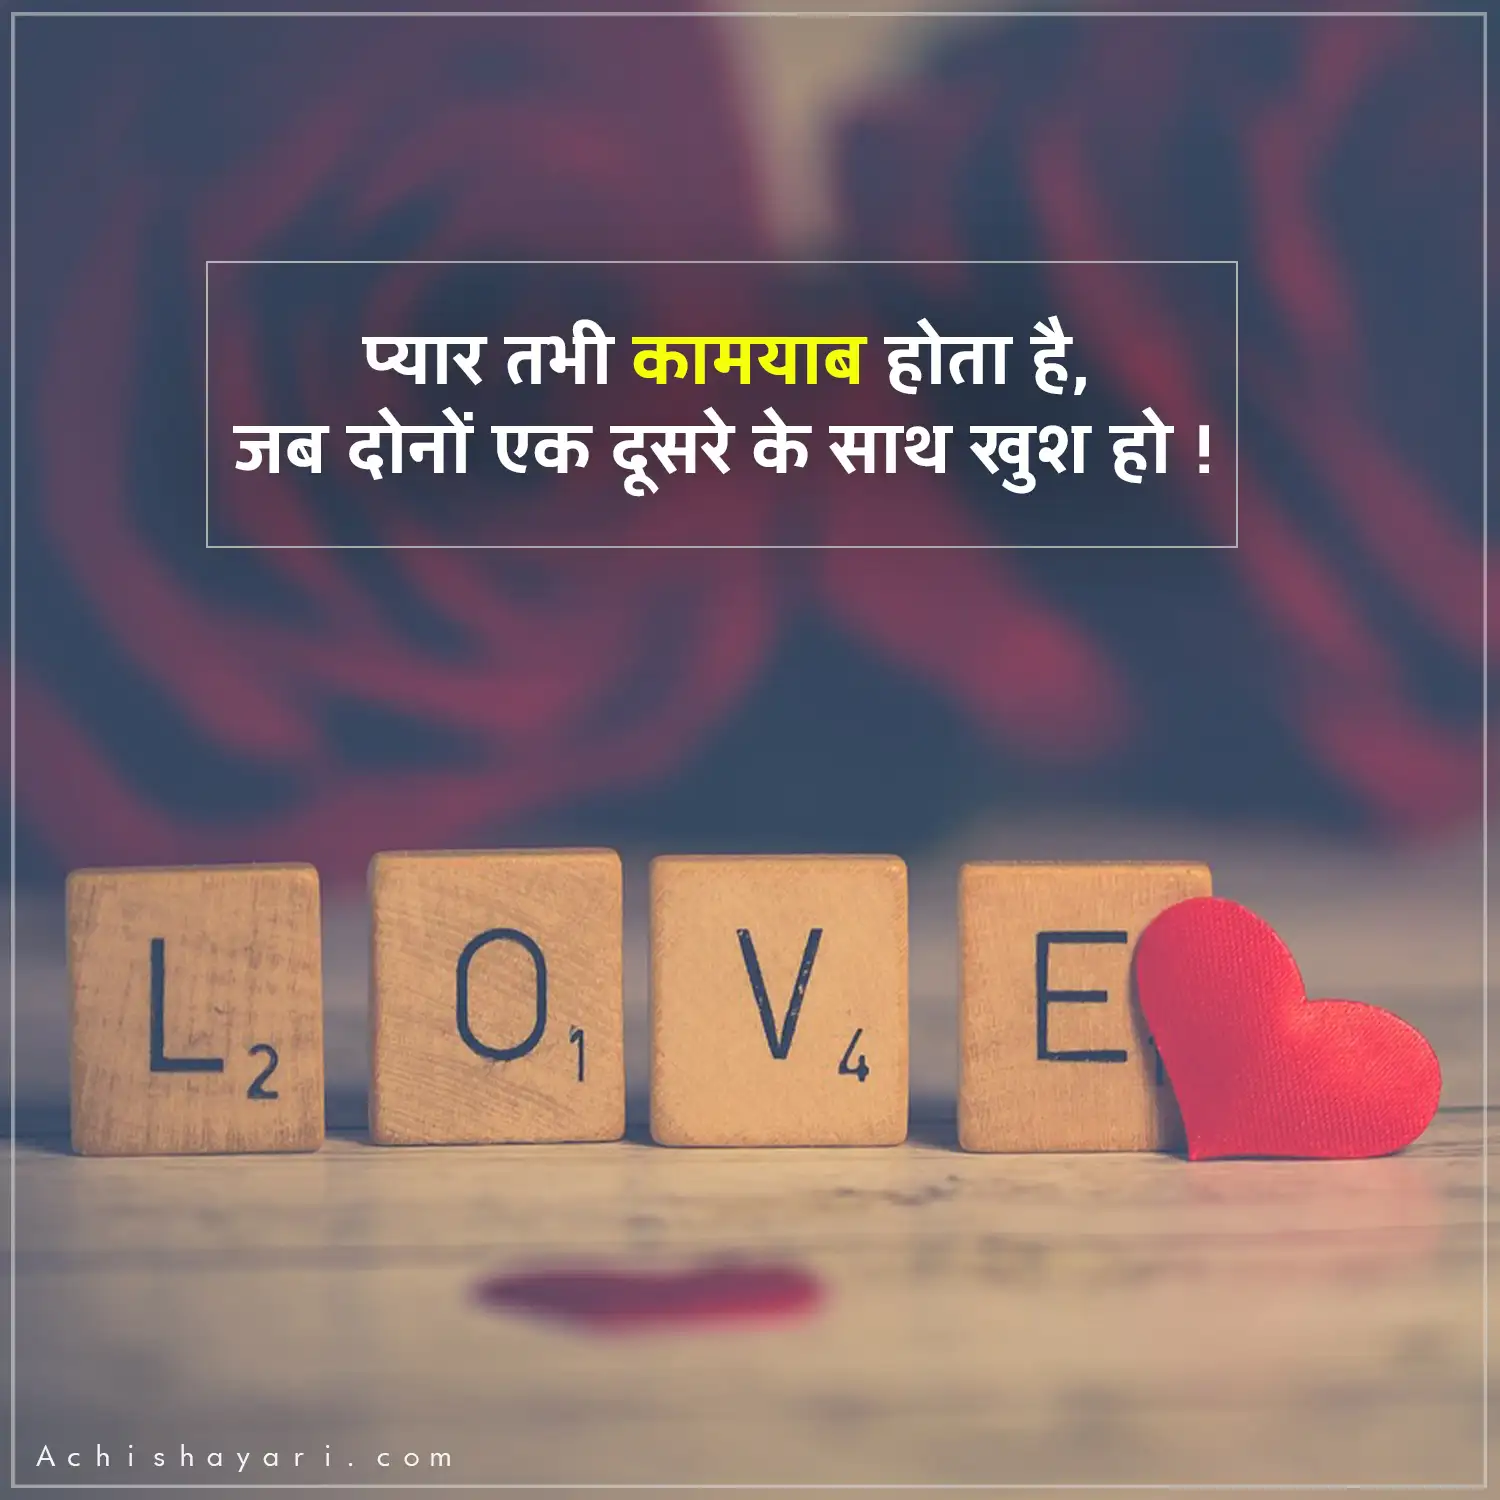 Love Quotes in Hindi for Girlfriend